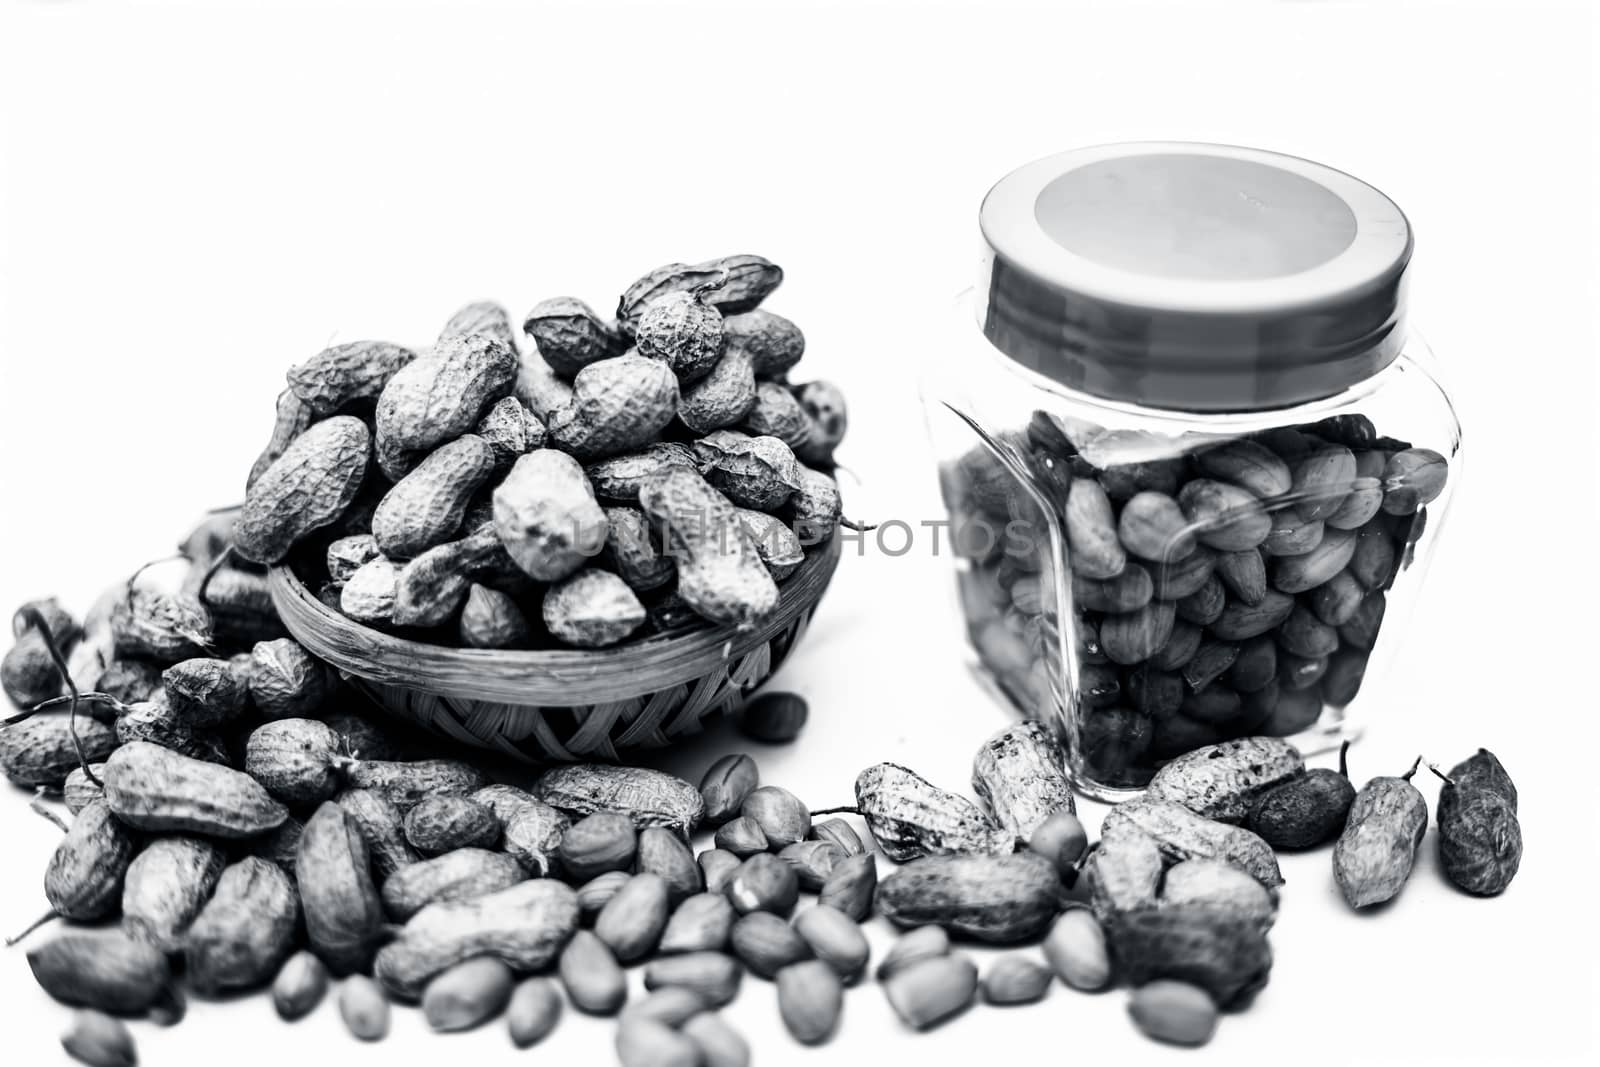 Close up of raw peanuts or groundnut isolated on white with some peeled in a separate bottle. by mirzamlk